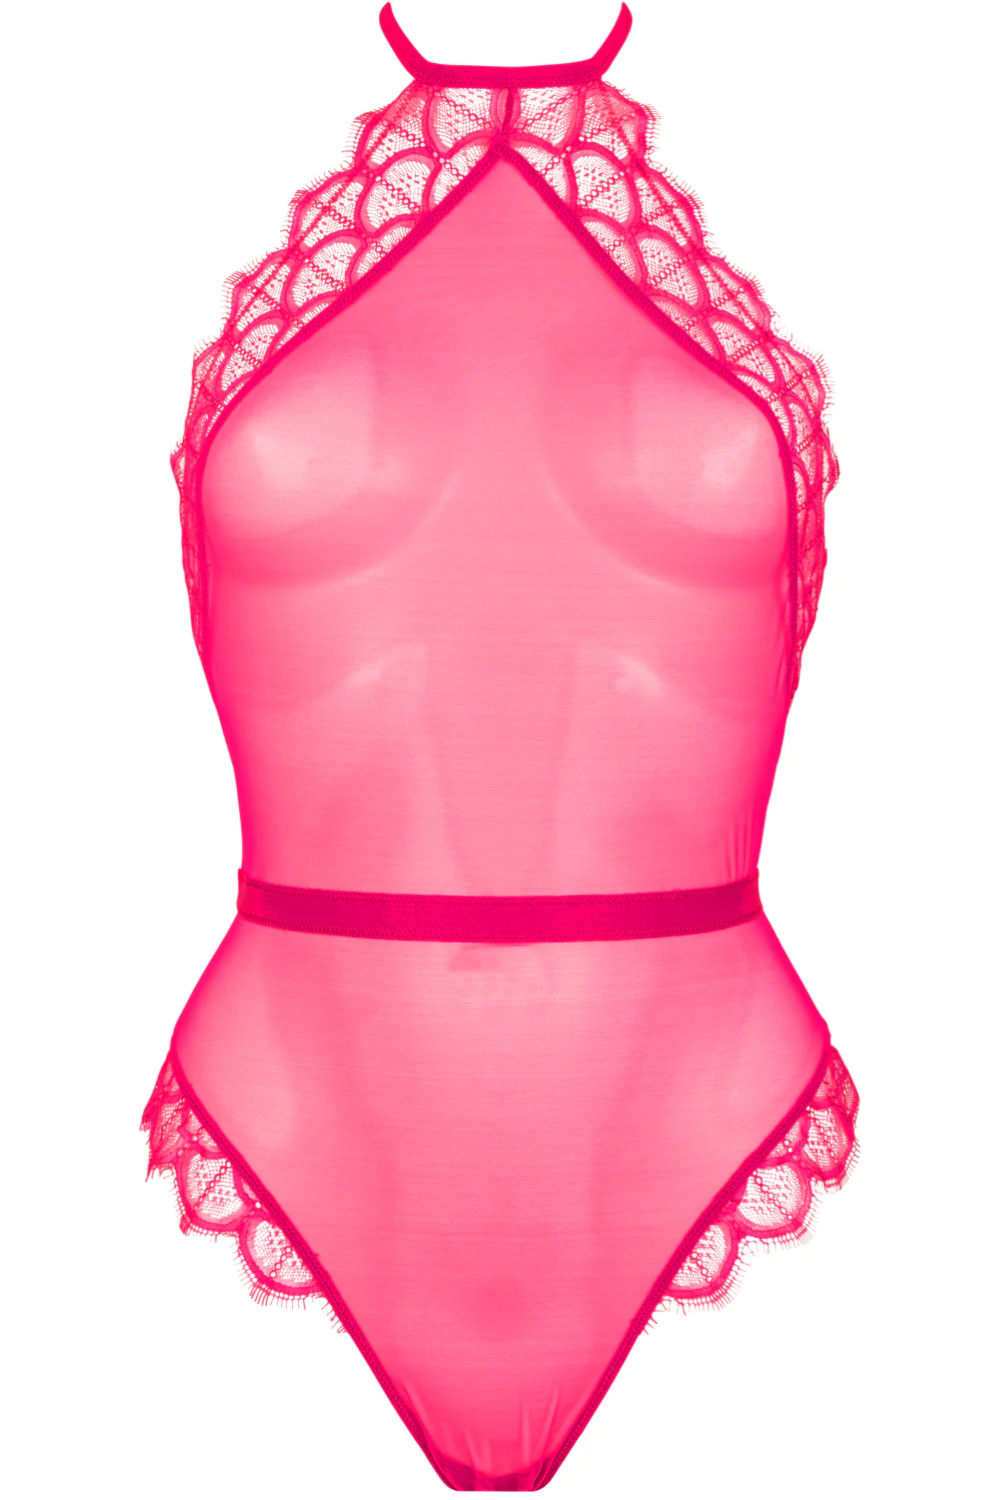 Mystic Shadow Sheer Lace Halter Thong Bodysuit - Kiss Pink